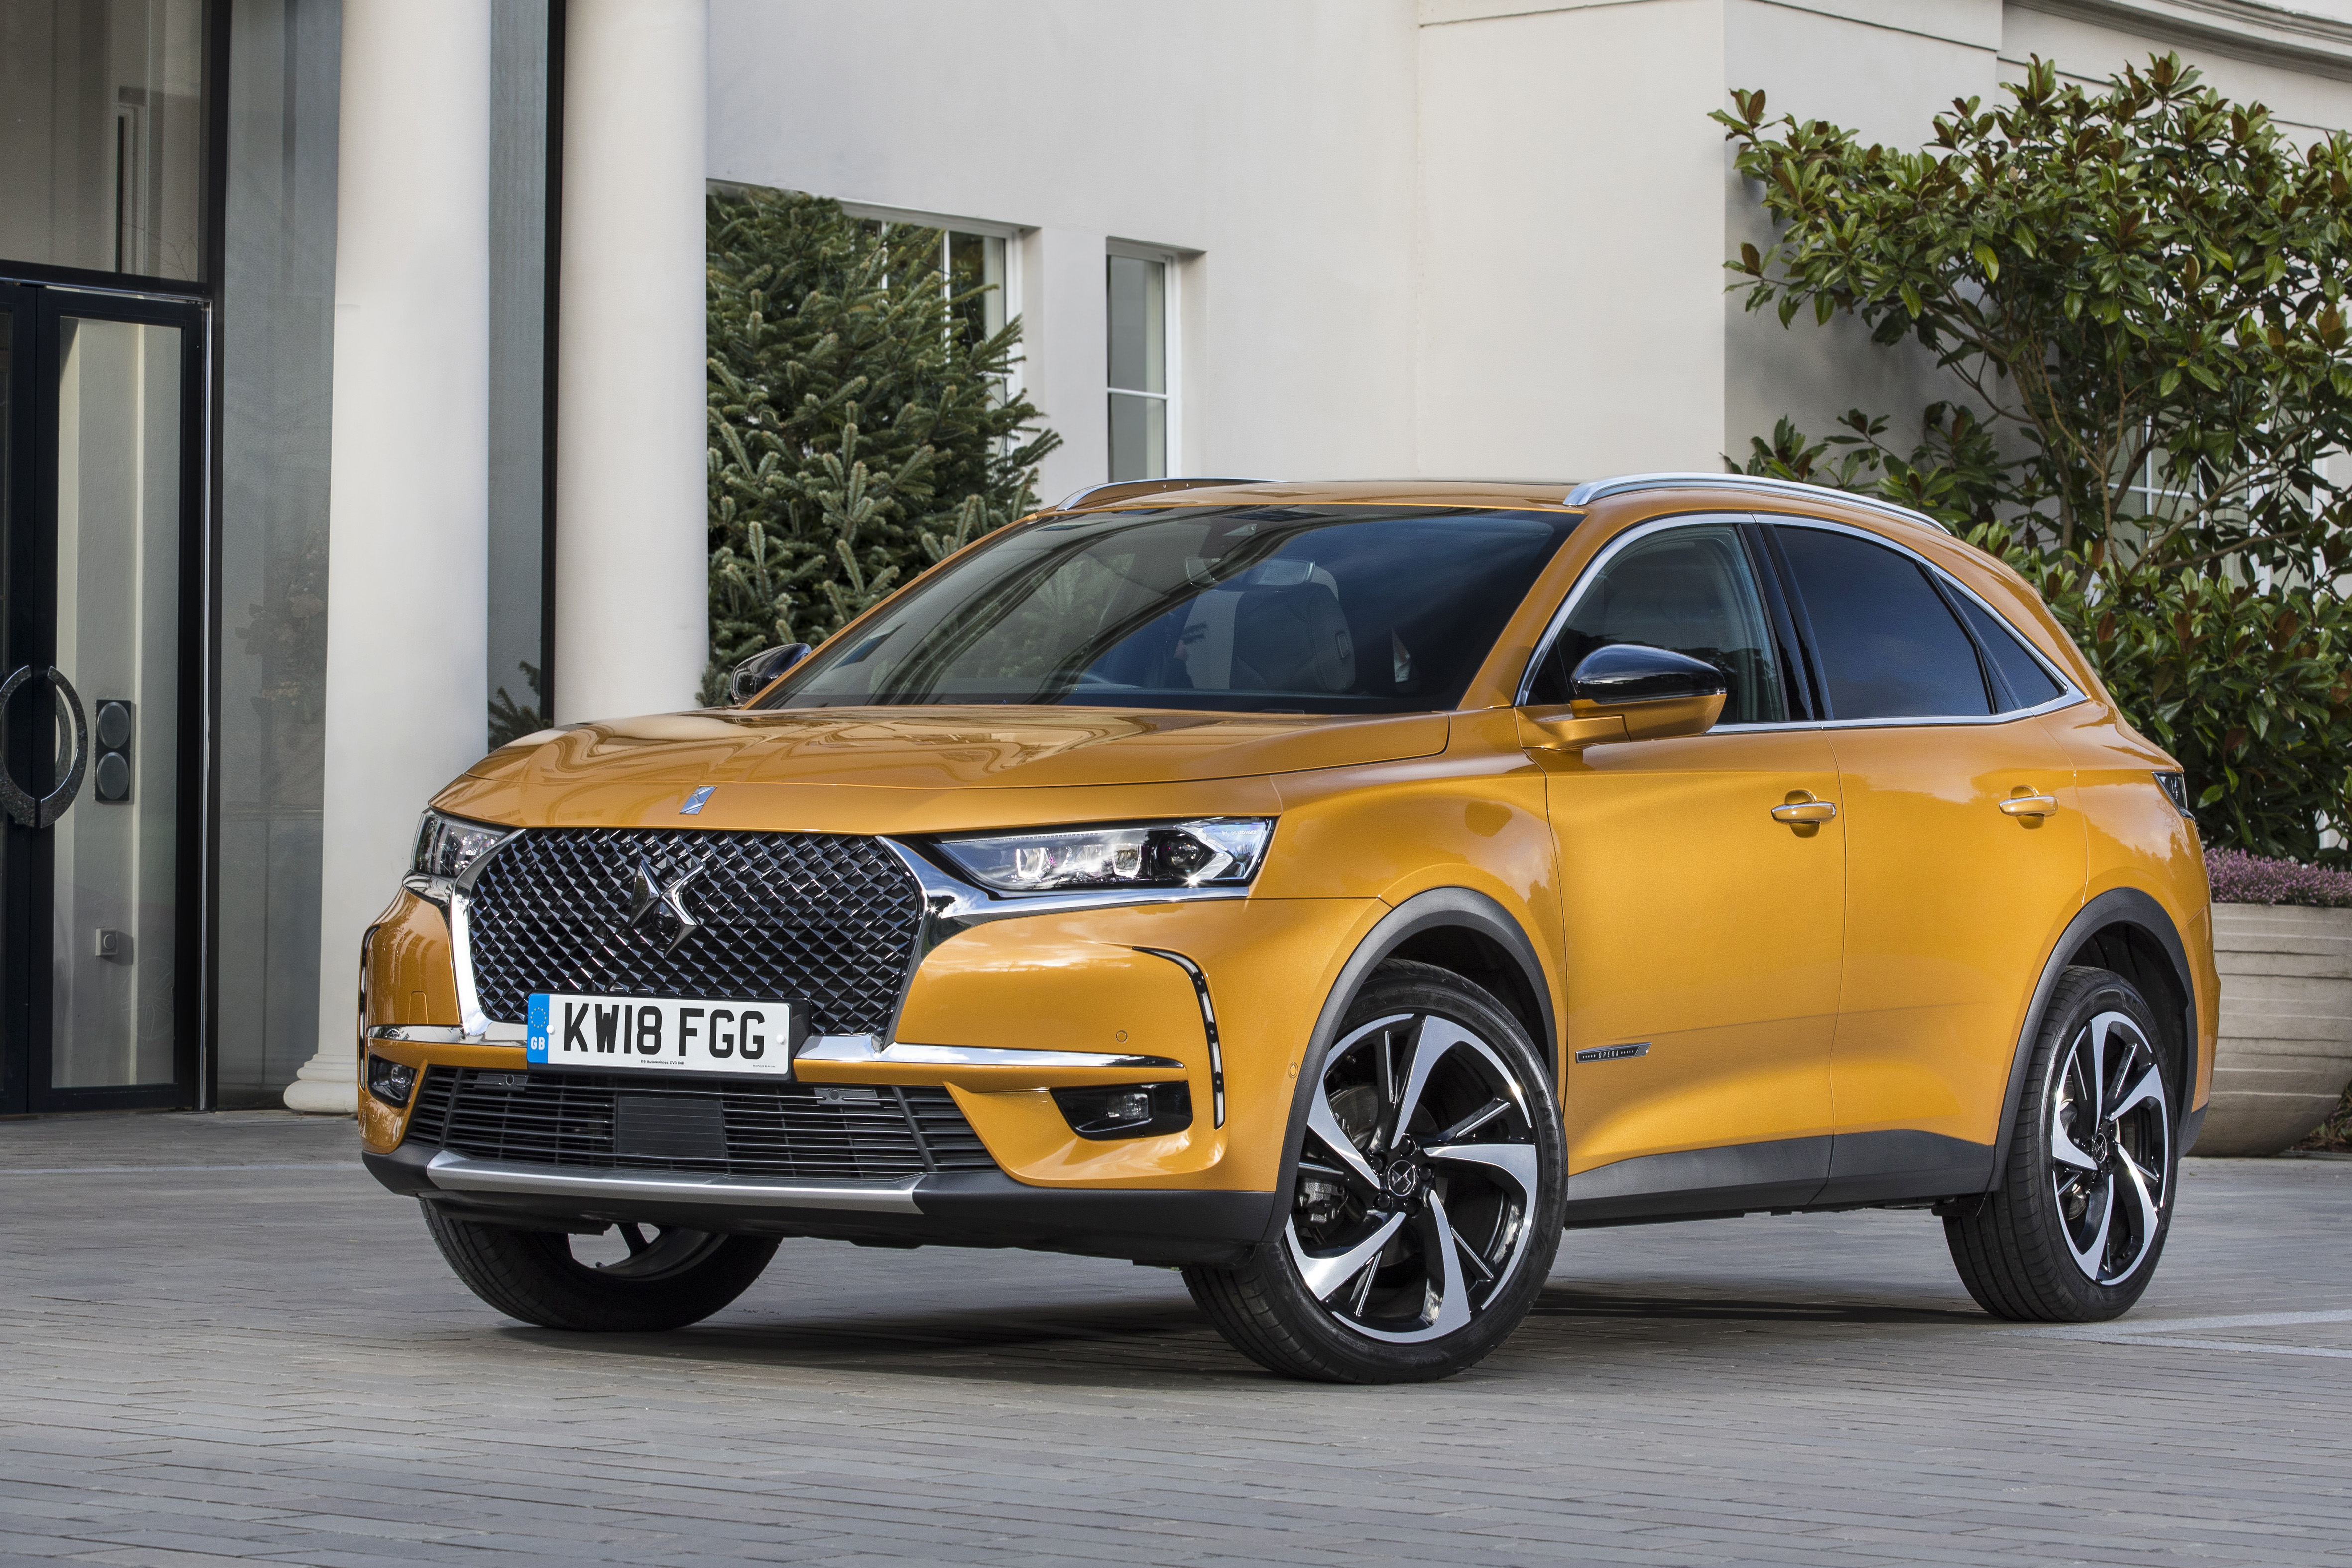 DS7 Crossback road test by Steve Rogers